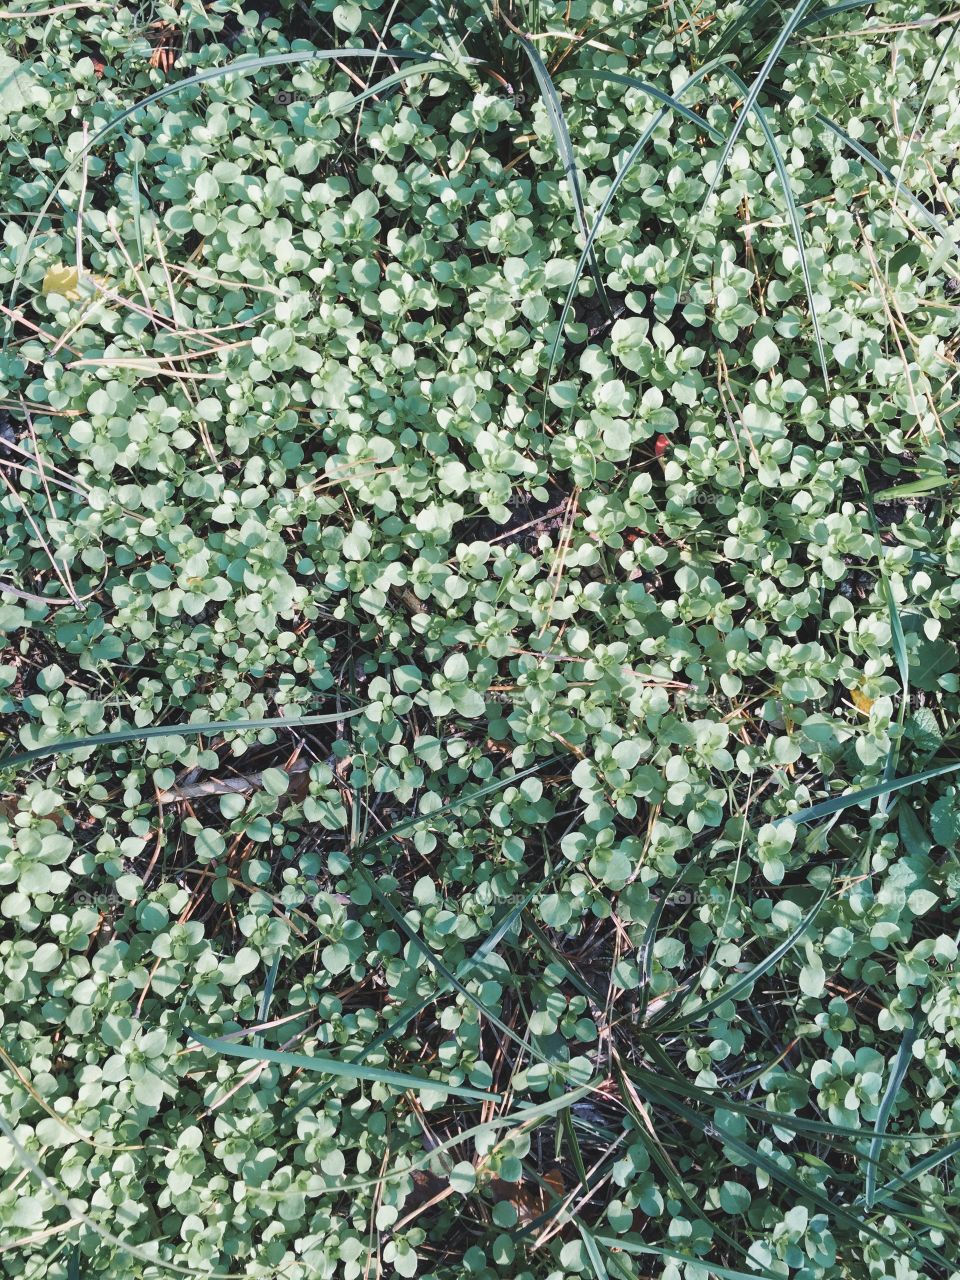 Small field of clover. Small field of clover, green color in nature